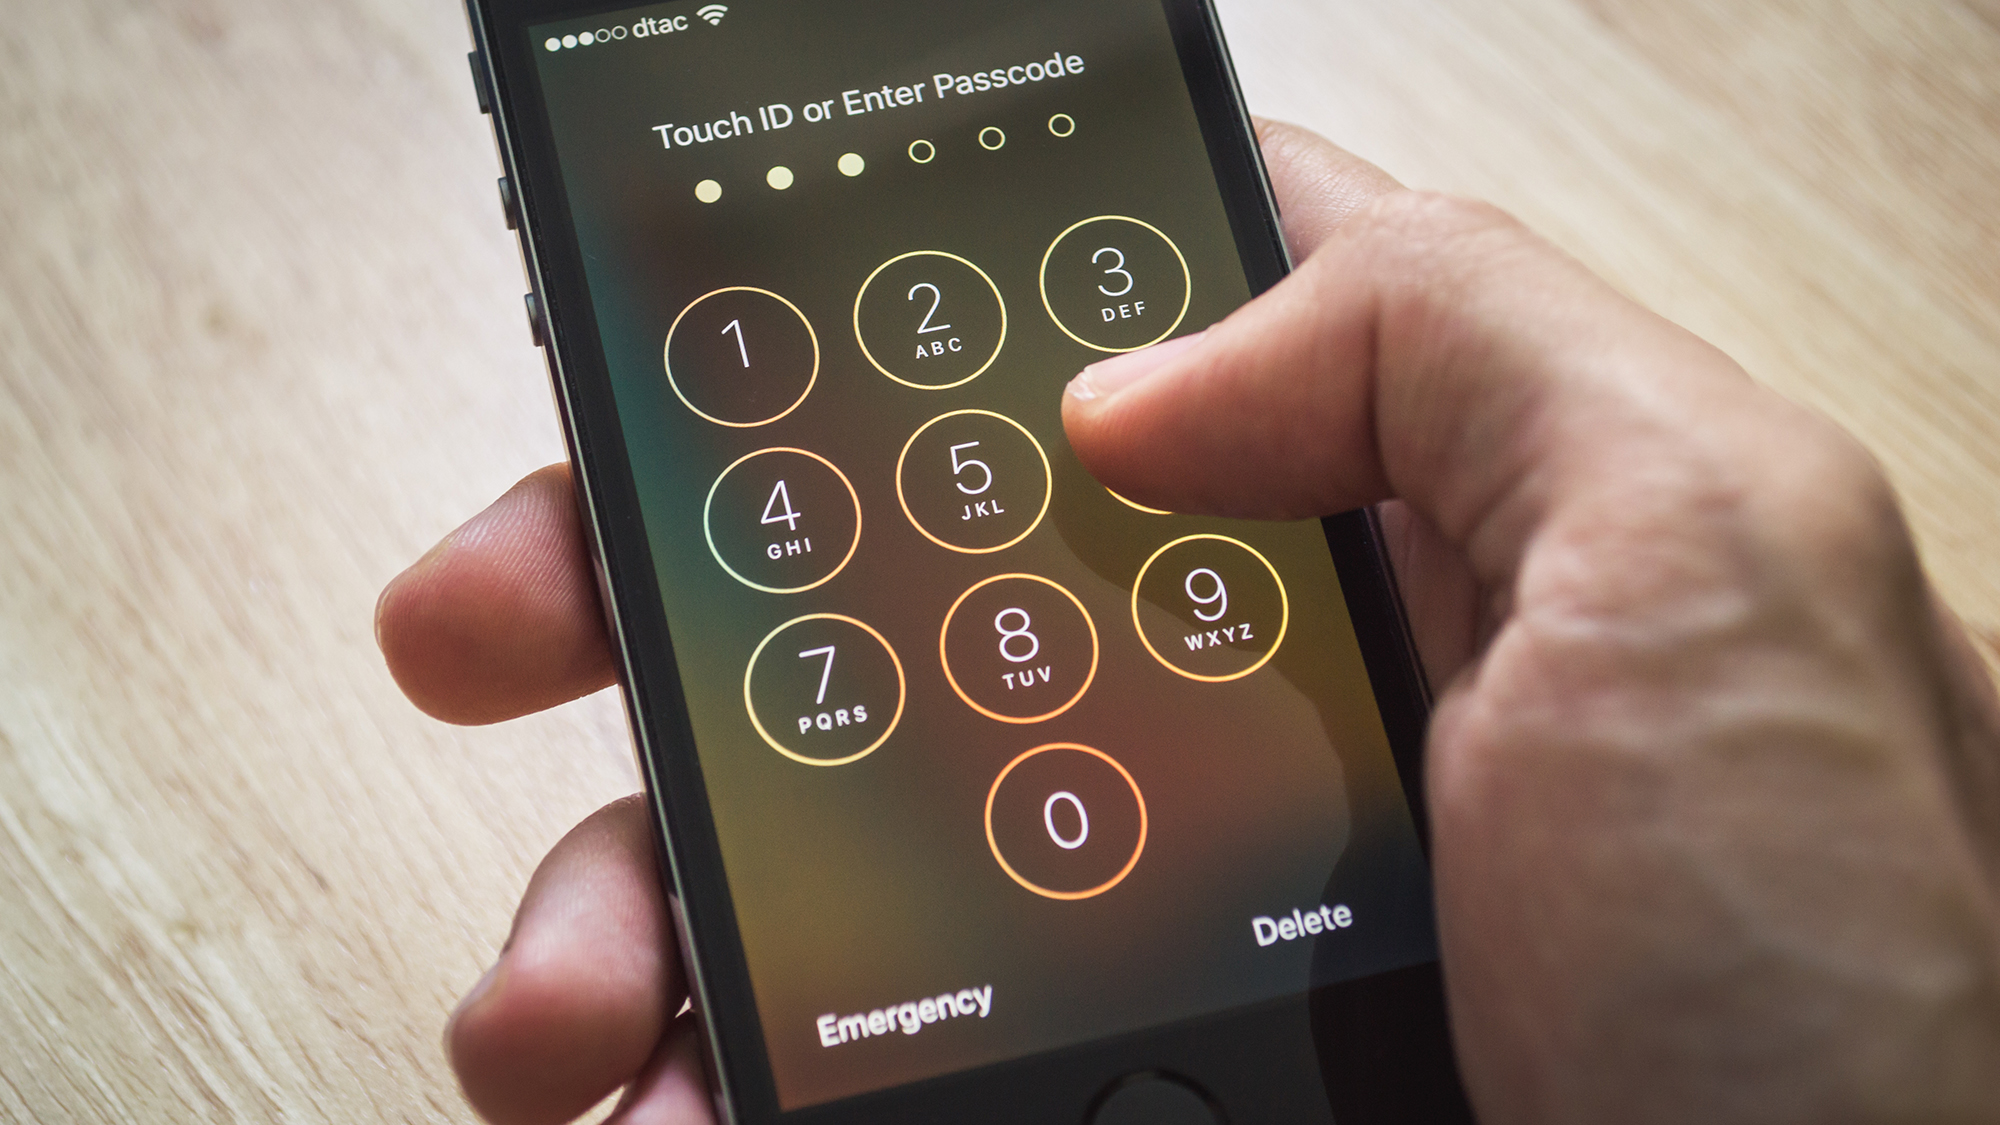 Reset Restriction Passcode On iPhone in 30 - Hit Hard News